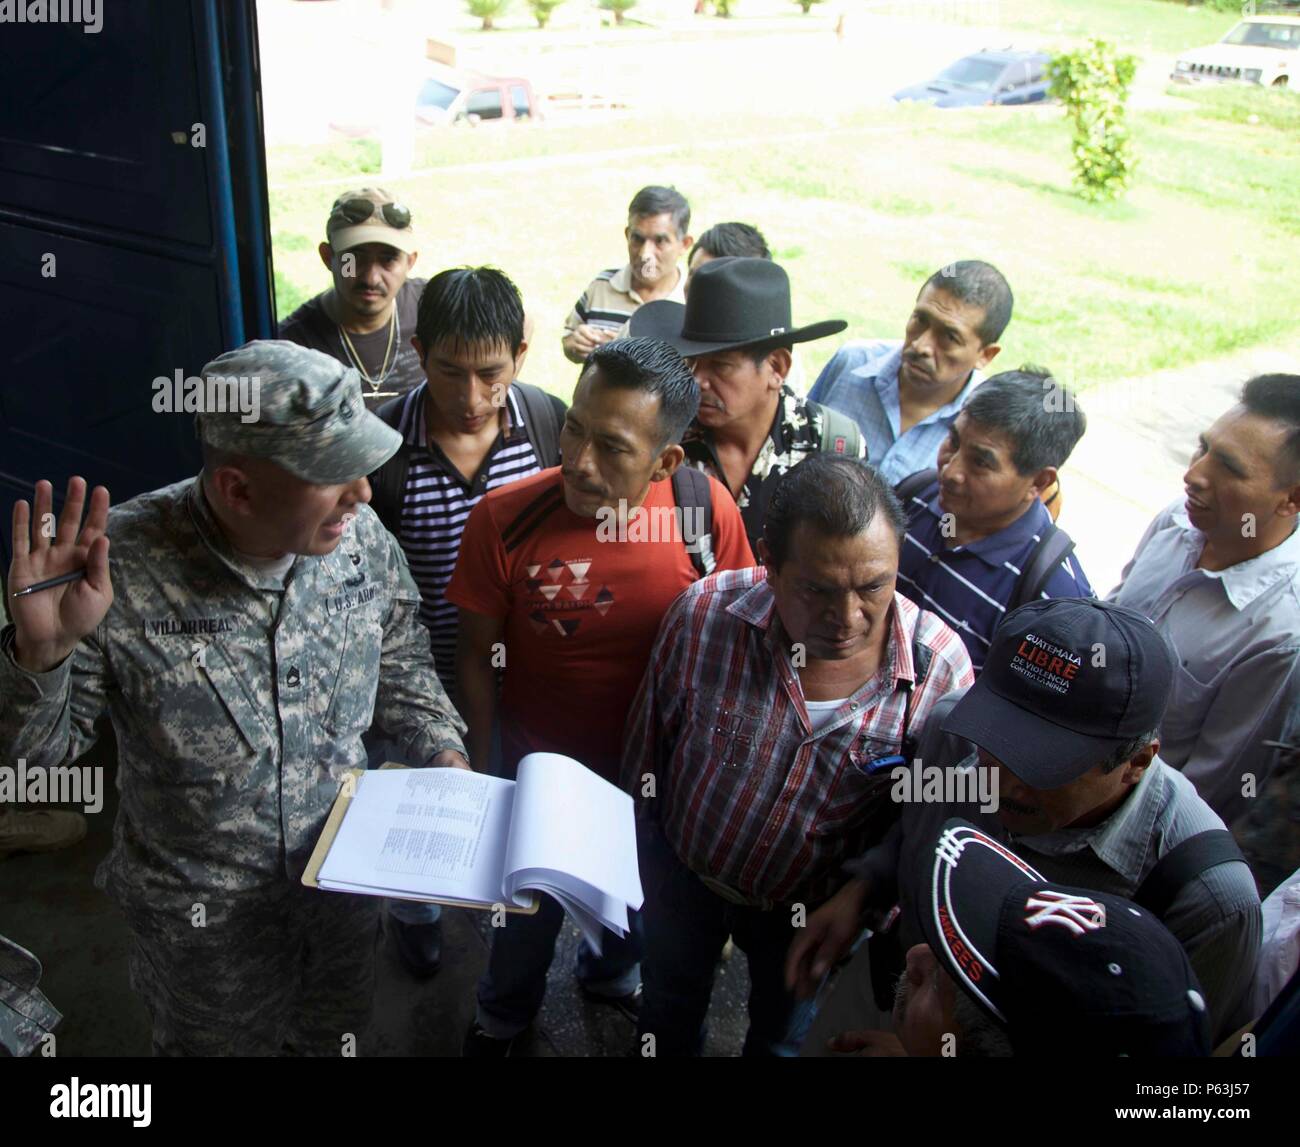 U.S. Army Sgt. 1st Class Luis Villarreal from the 345th Psychological Operations Company has the local Cocodes sign a paper to ensure he knows how many members show up to the Medical Readiness Exercise meeting as part of the Beyond The Horizon Operation at San Pablo, Guatemala, April 29, 2016. Task Force Red Wolf and Army South conducts Humanitarian Civil Assistance Training to include tactical level construction projects and Medical Readiness Training Exercises providing medical access and building schools in Guatemala with the Guatemalan Government and non-government agencies from 05MAR16 to Stock Photo